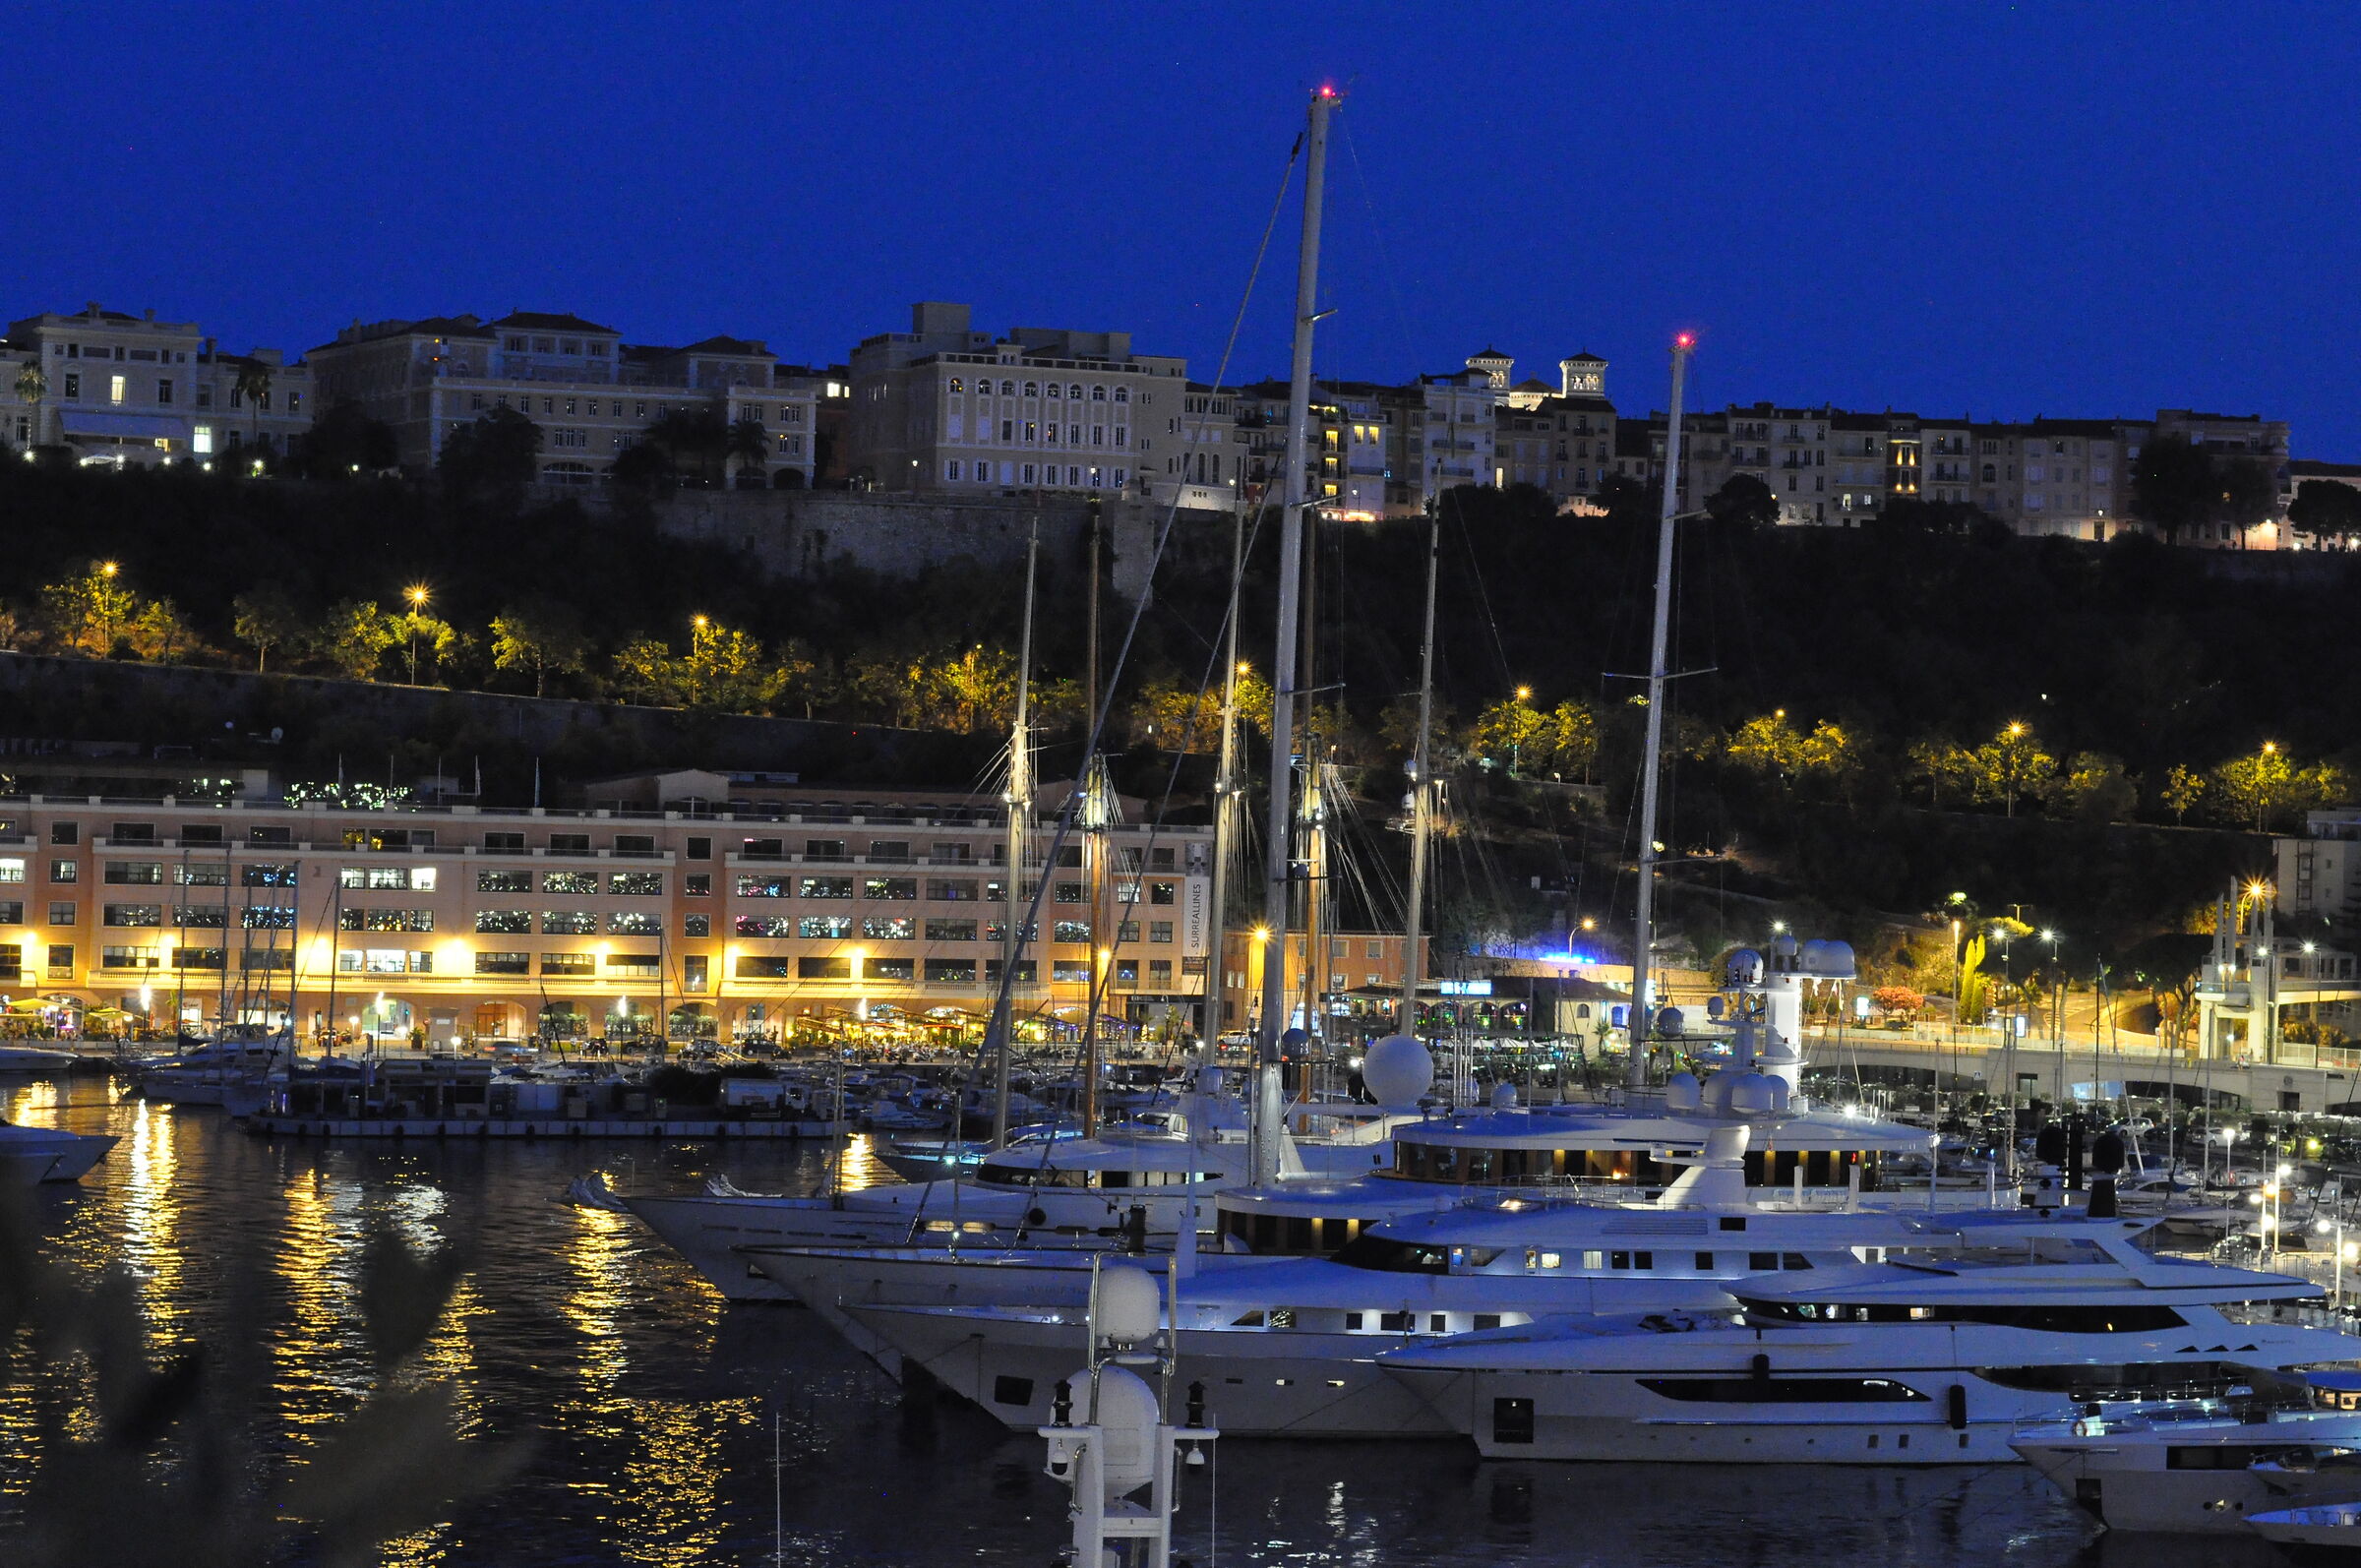 Monte Carlo by night...